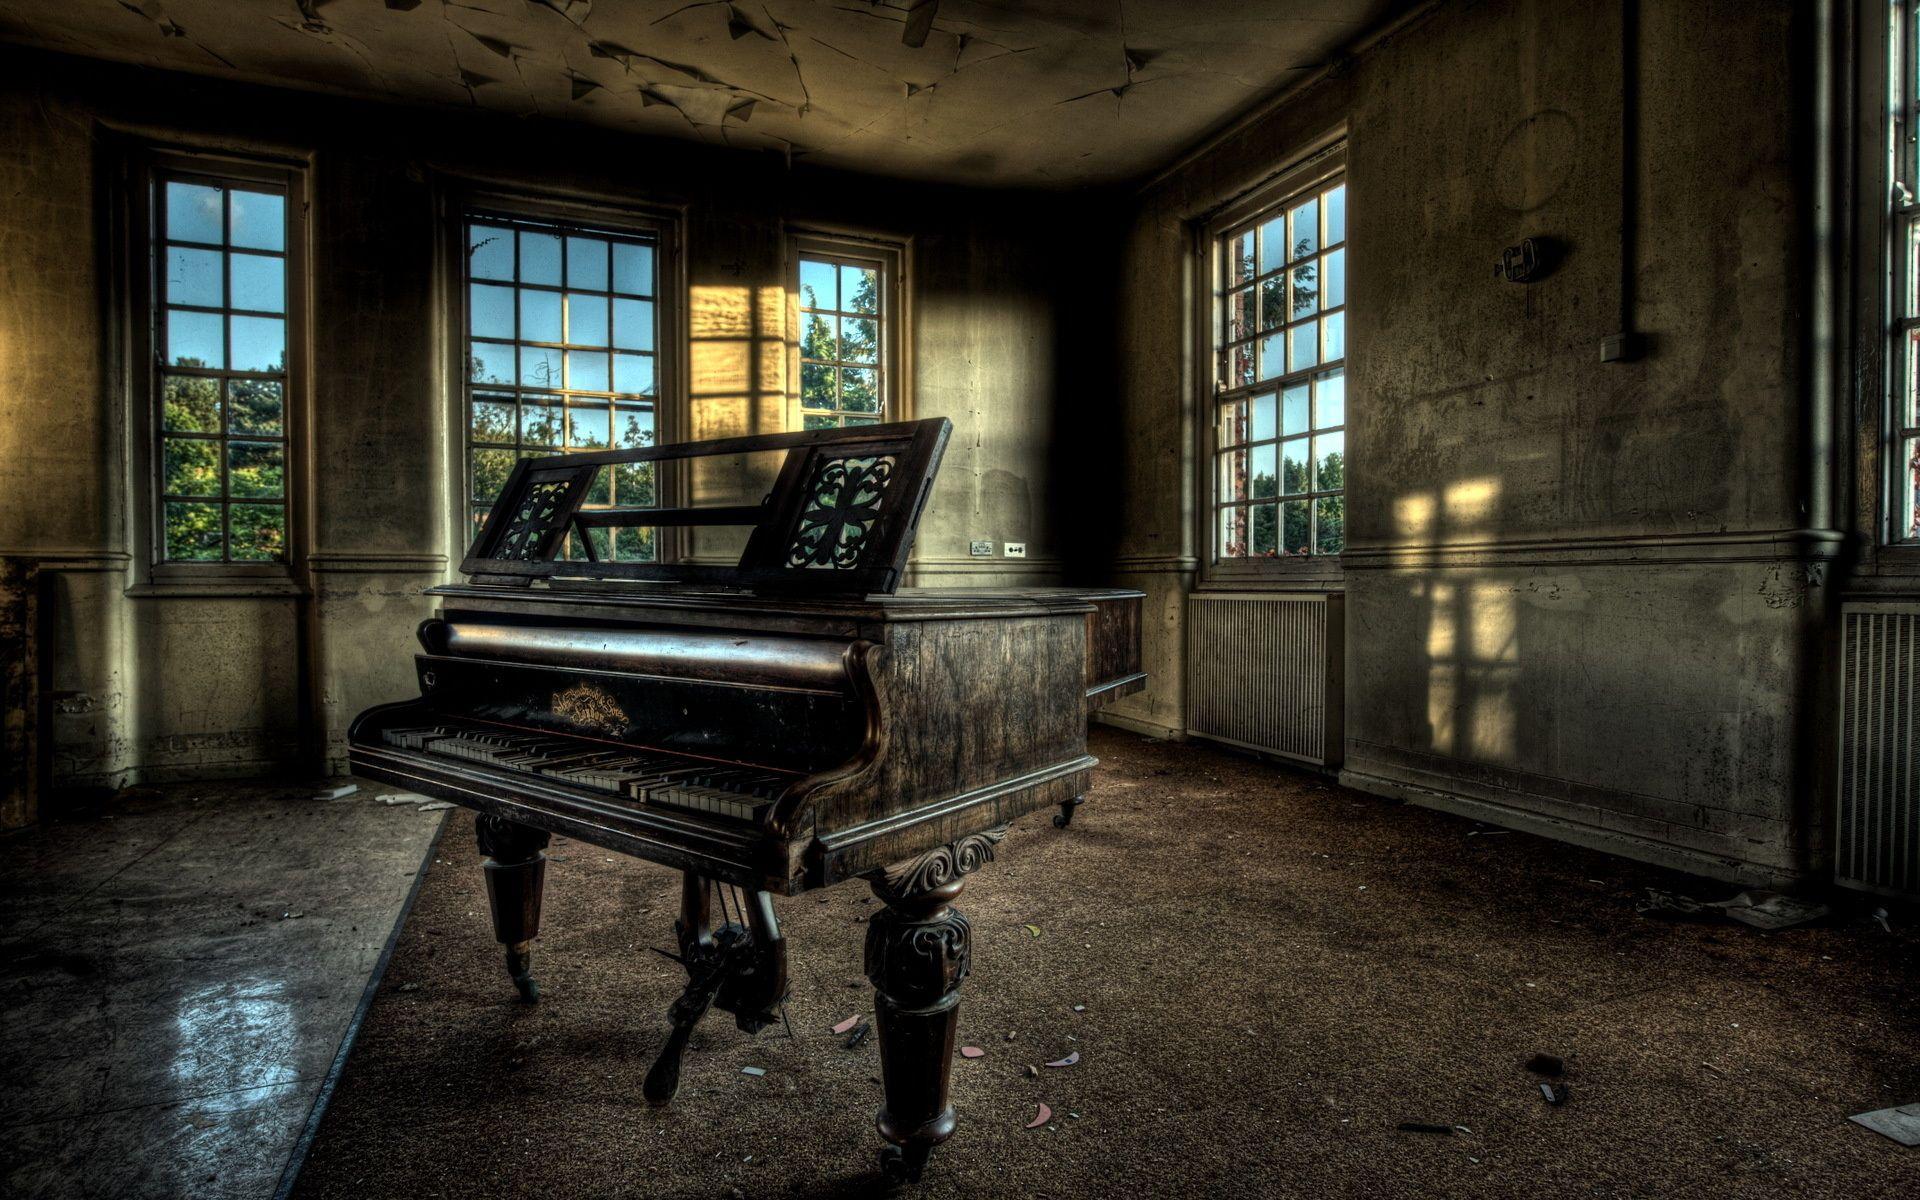 Piano Wallpaper Background 58721 2560x1600 px